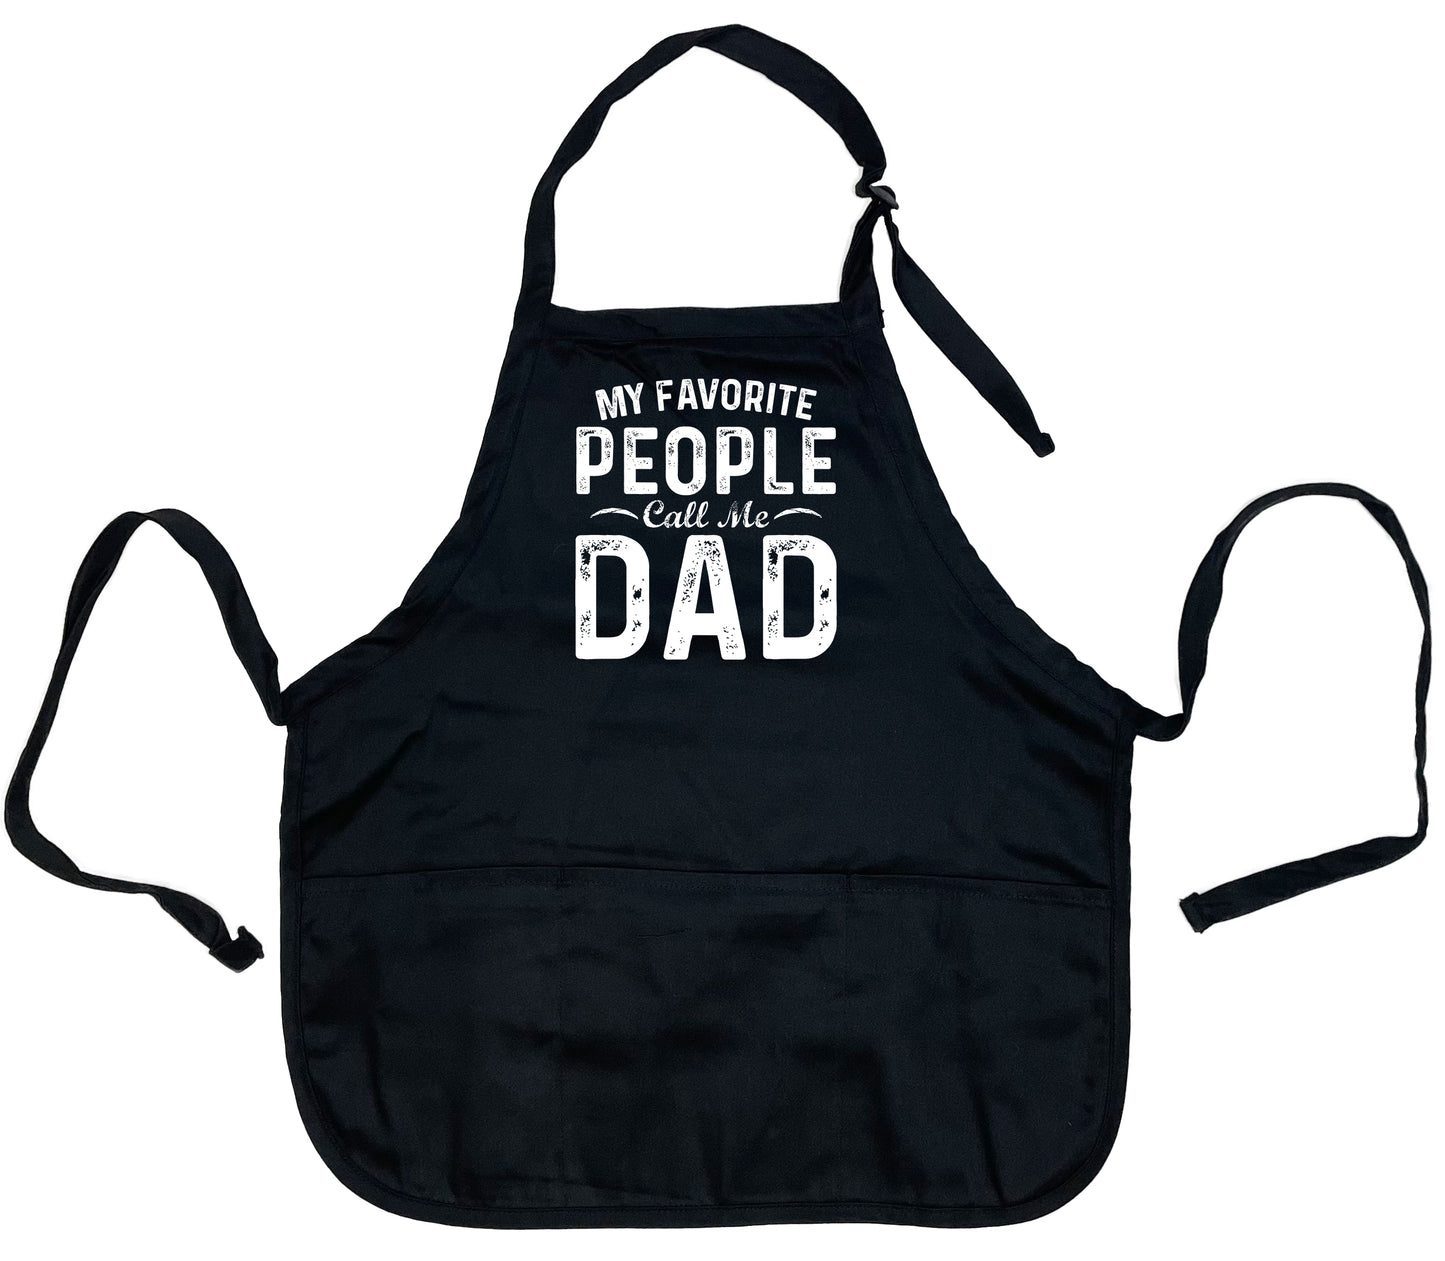 My Favorite People Call Me Dad Apron